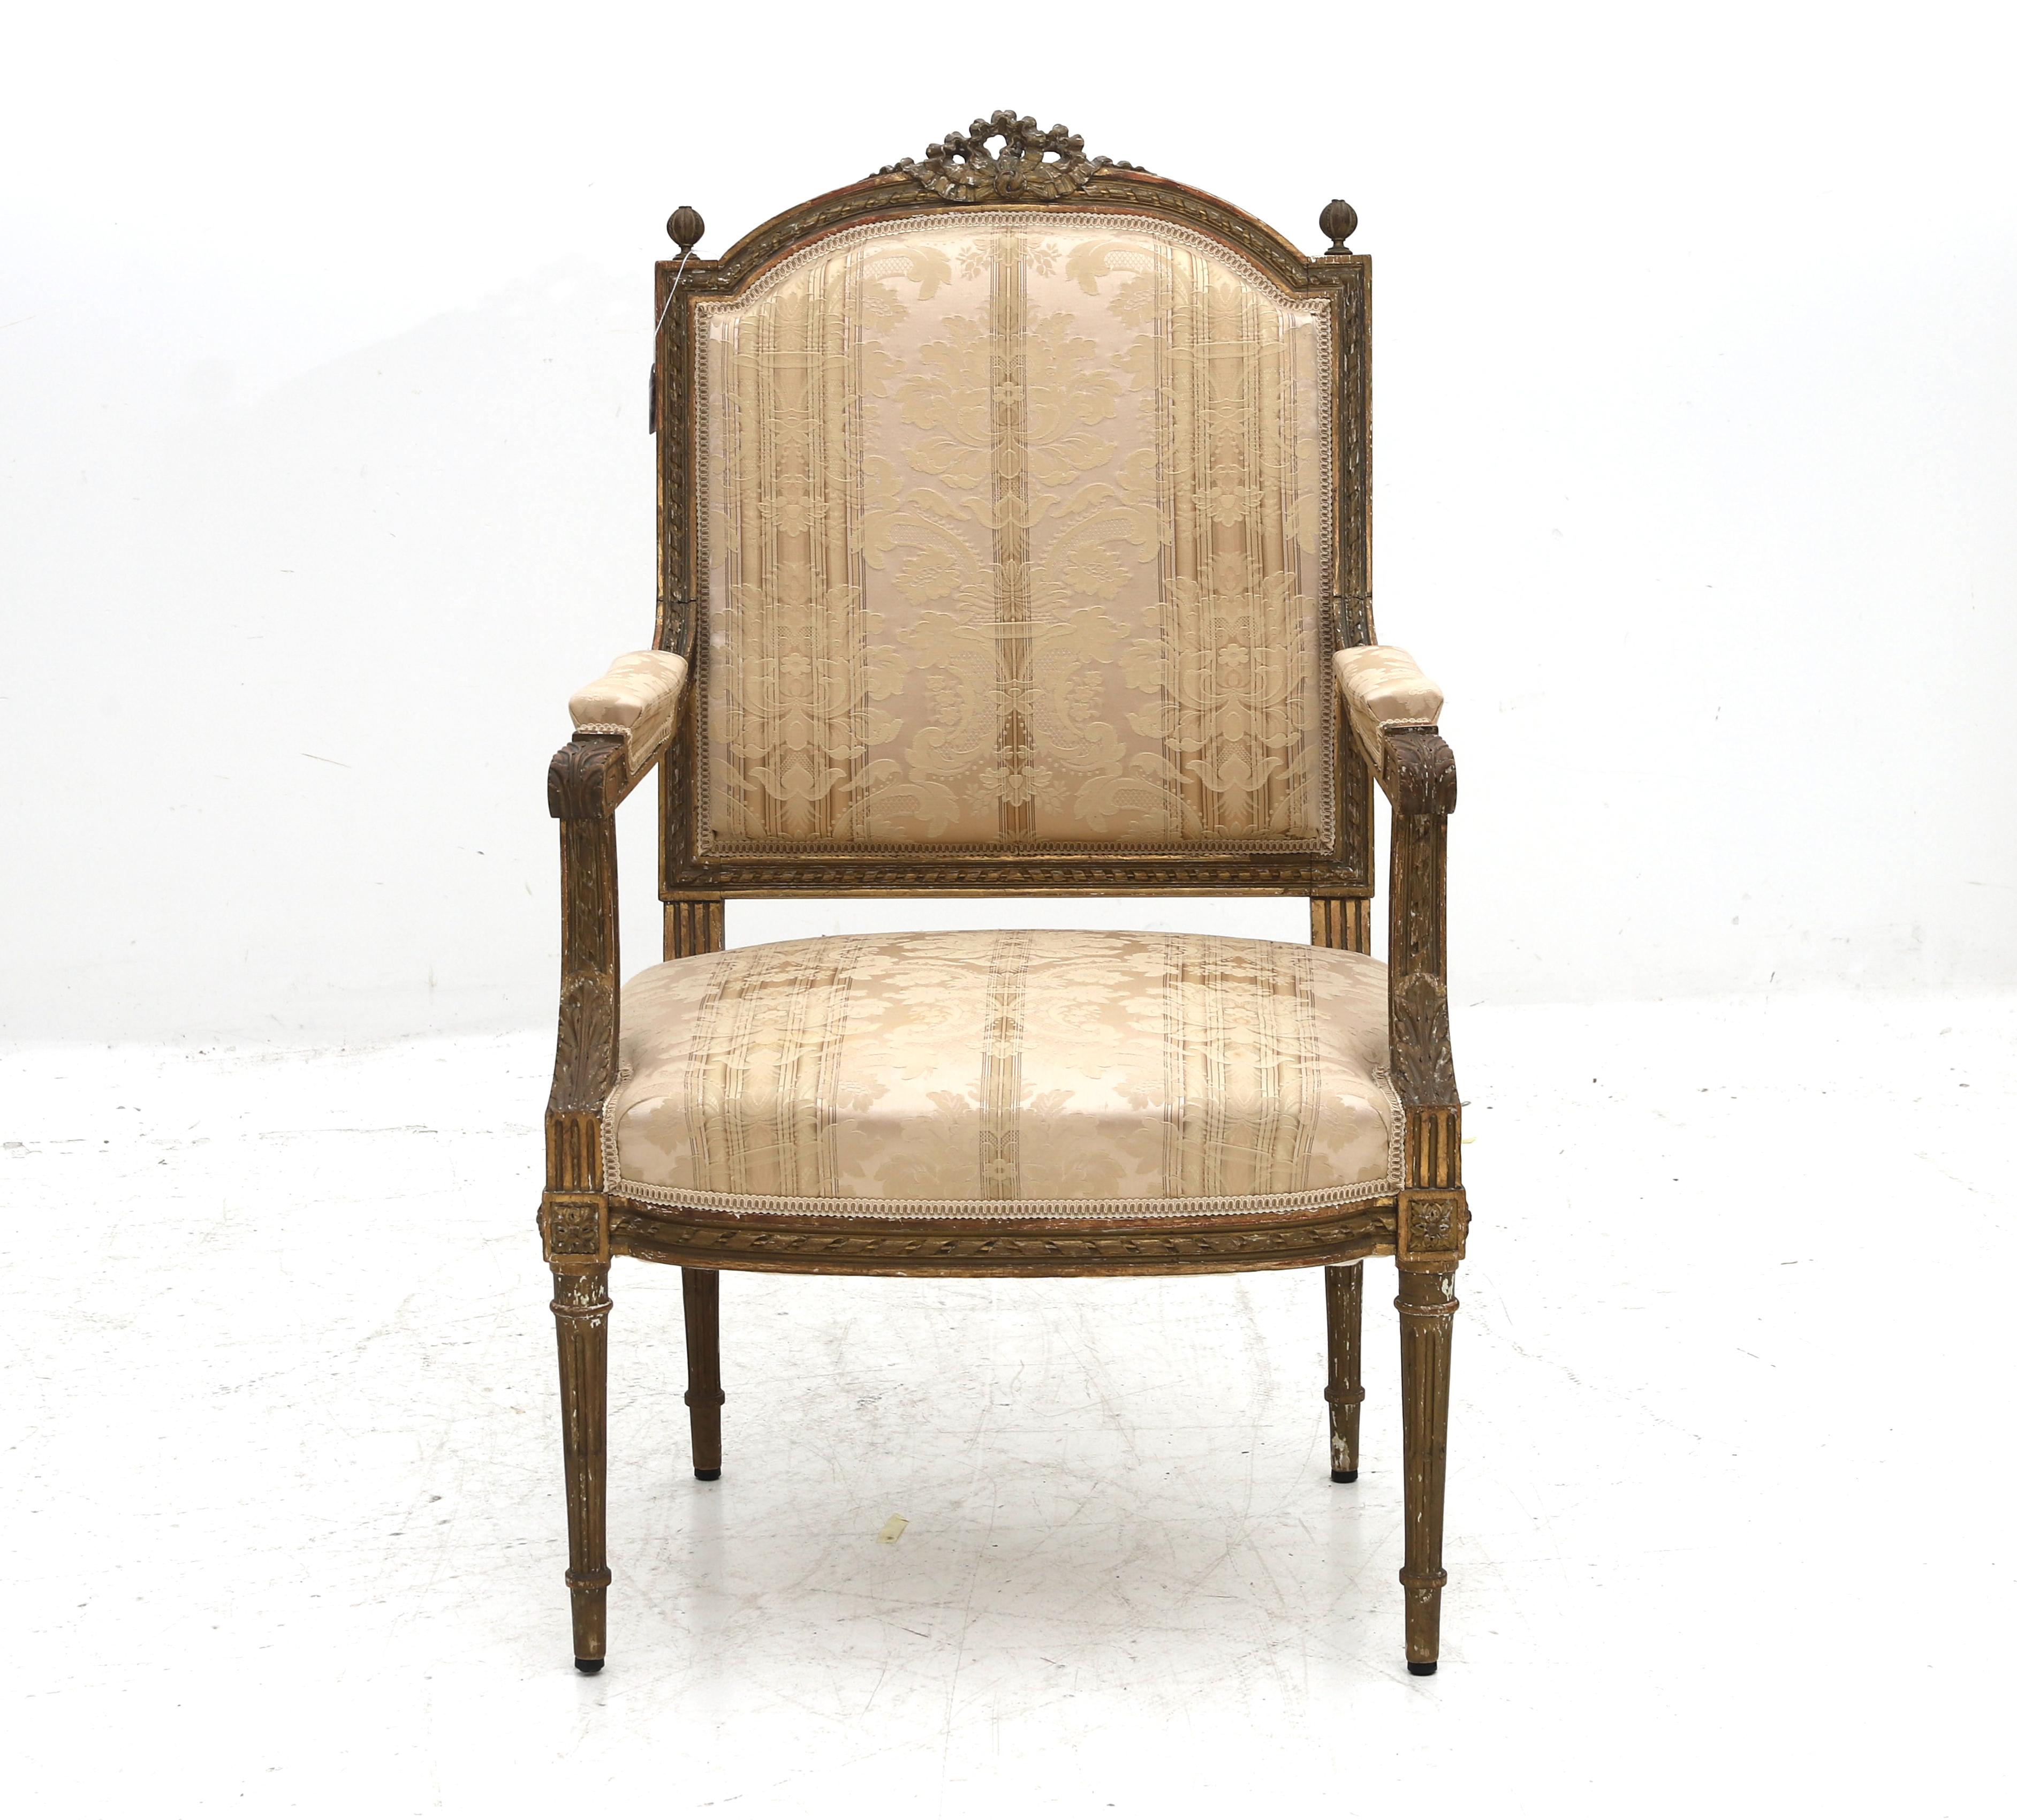 A Bergère in the Louis XVI style from France from the 19th century. Backrest topped with carved